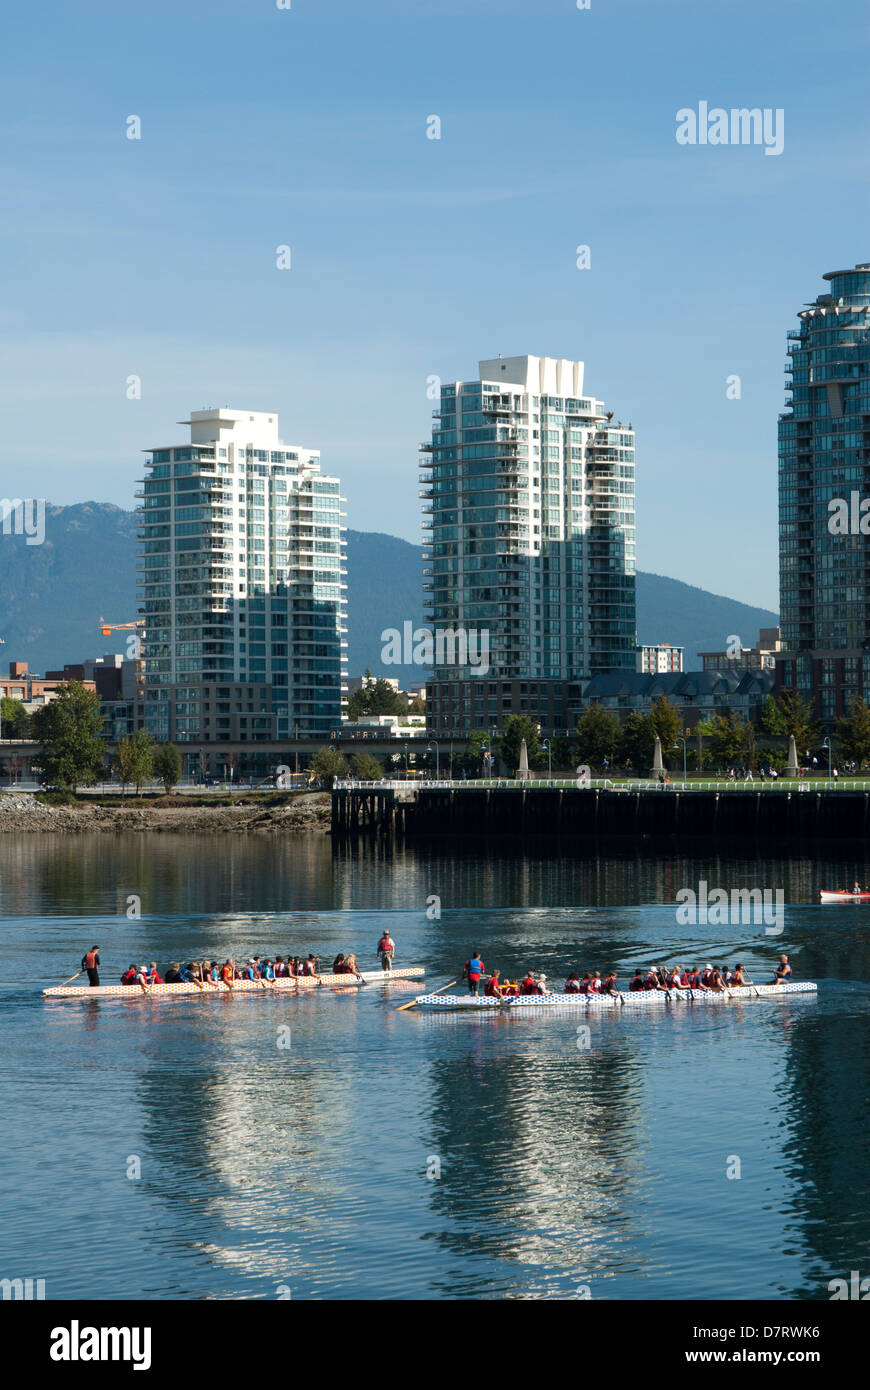 Dragon boat racers practicing in the waters of False Creek, Vancouver, British Columbia, Canada Stock Photo